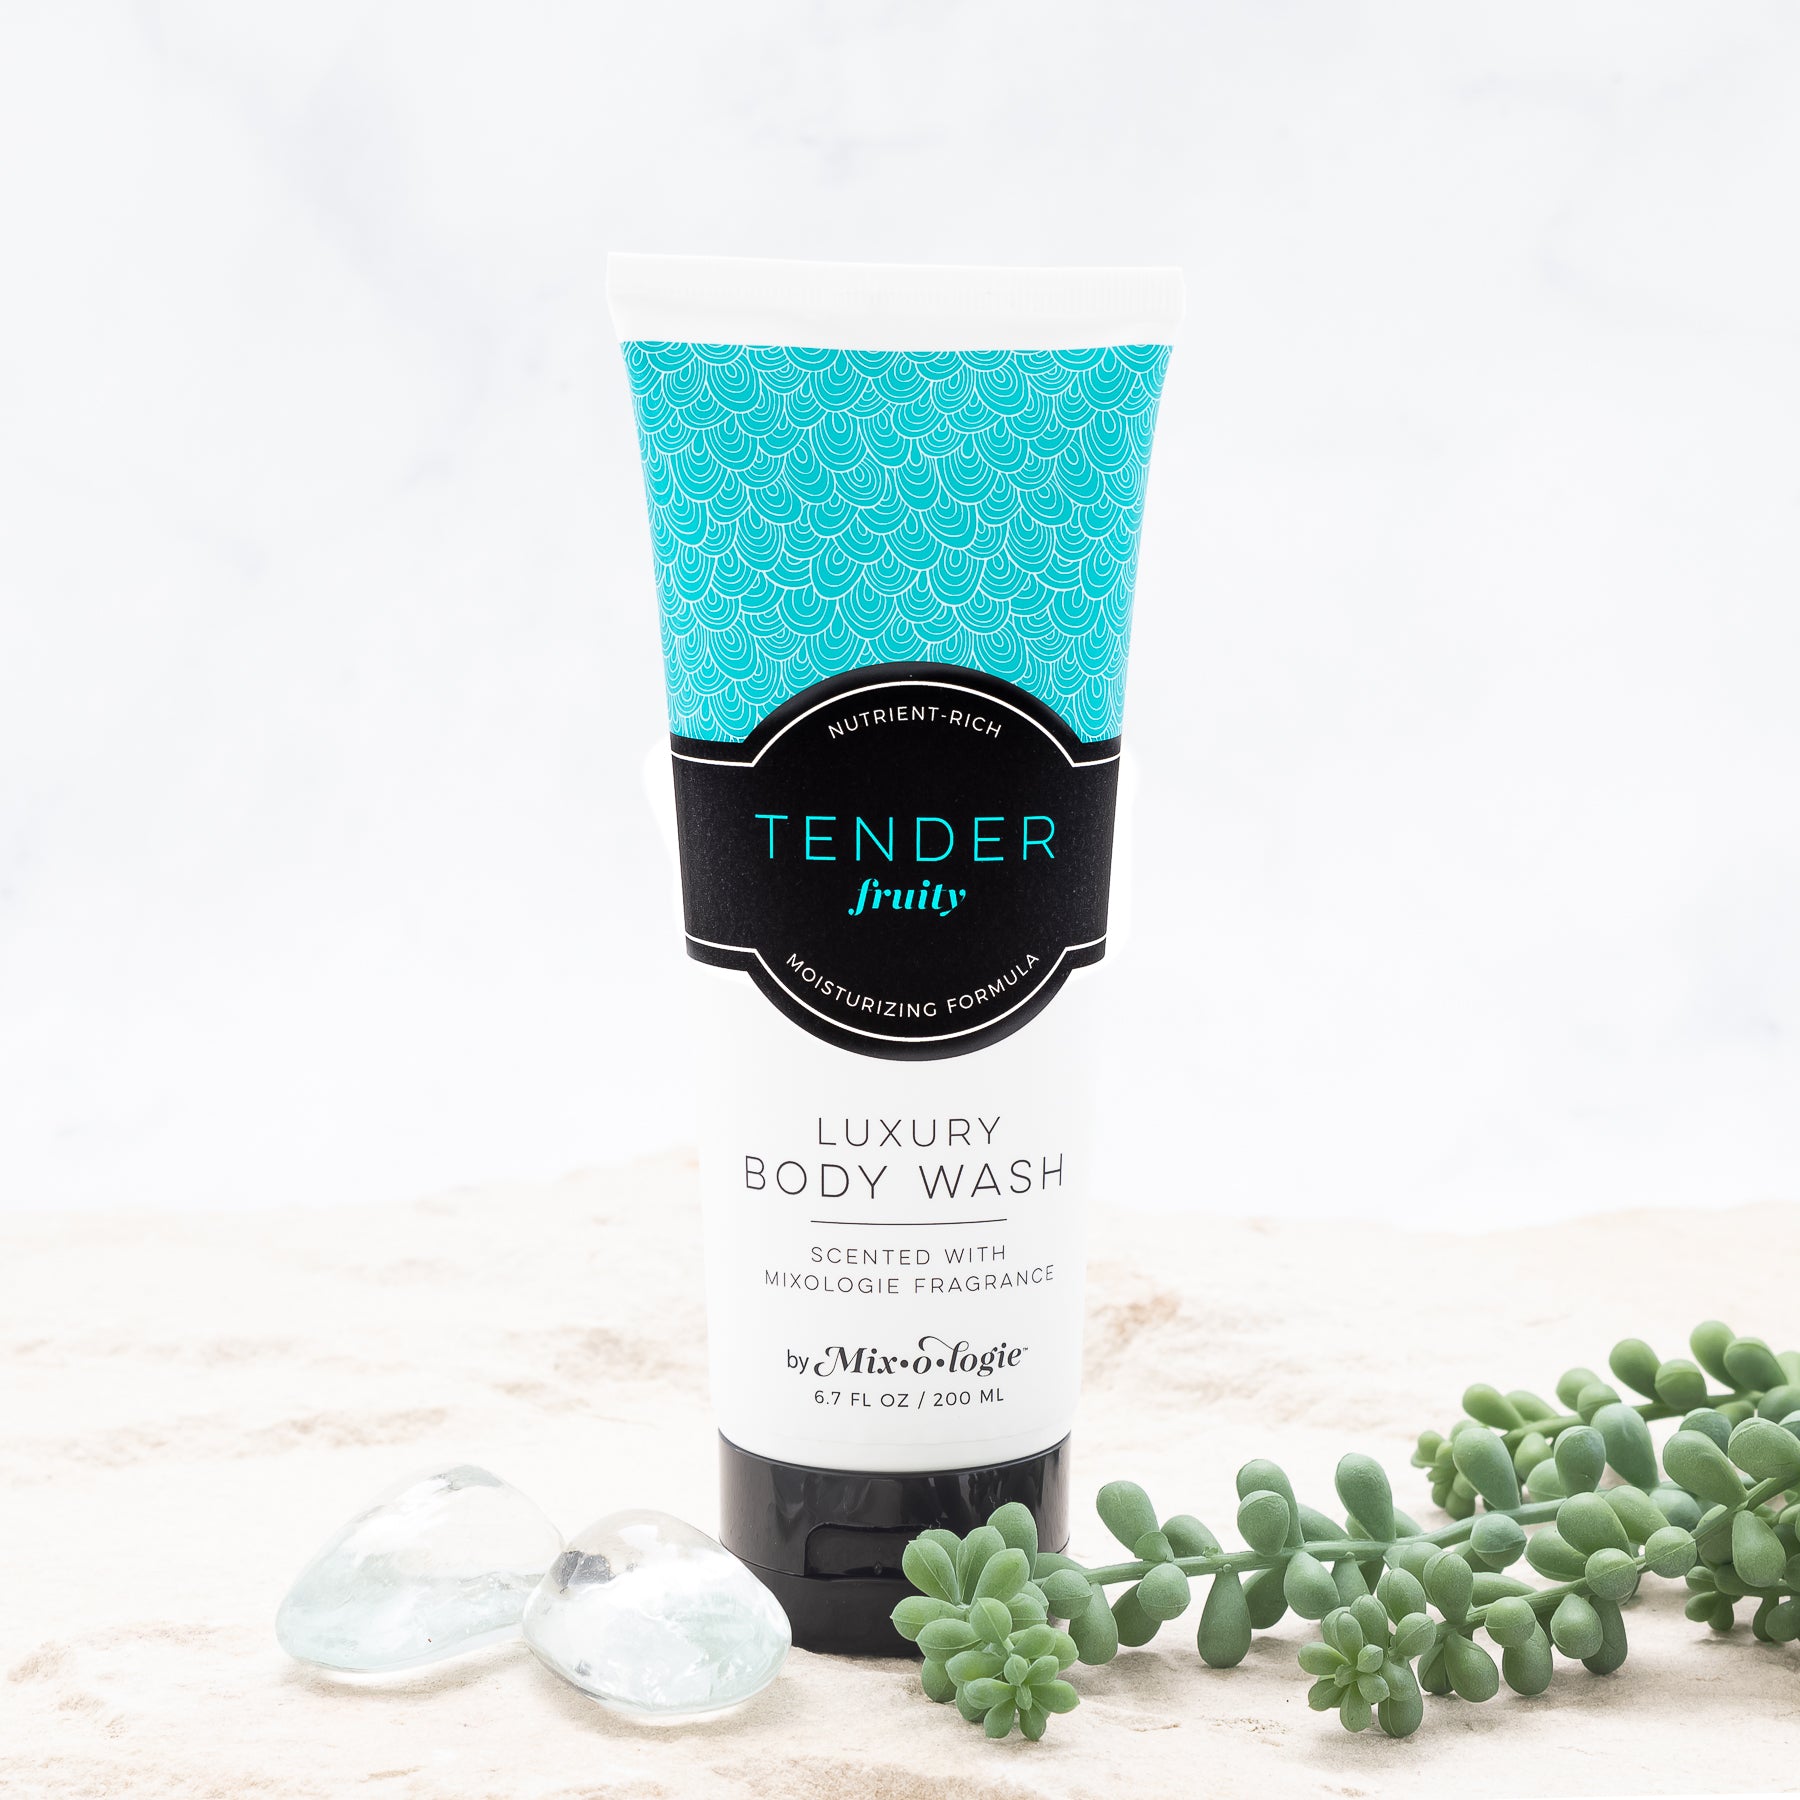 Luxury Body Wash in Mixologie’s Tender (Fruity) in bright blue color sample package with black label. Contains 6.7 fl oz or 200 mL pictured in sand with rocks and greenery.